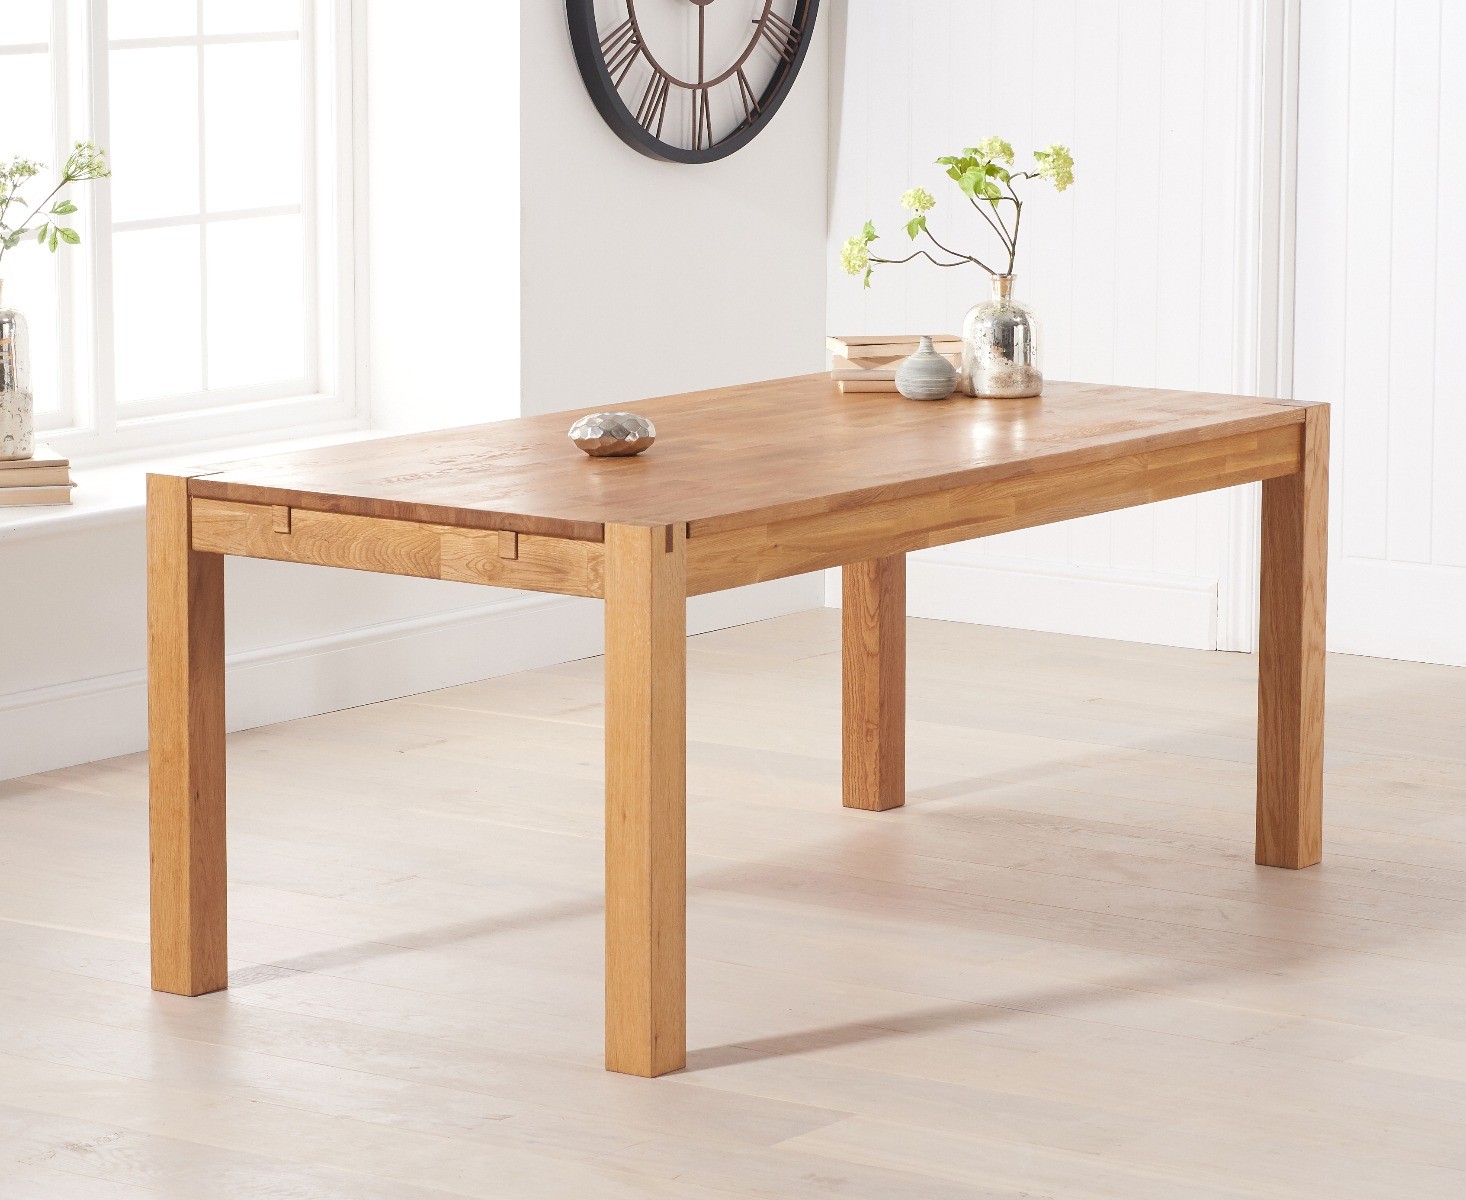 Photo 1 of Verona 150cm oak table with larson brown faux leather benches